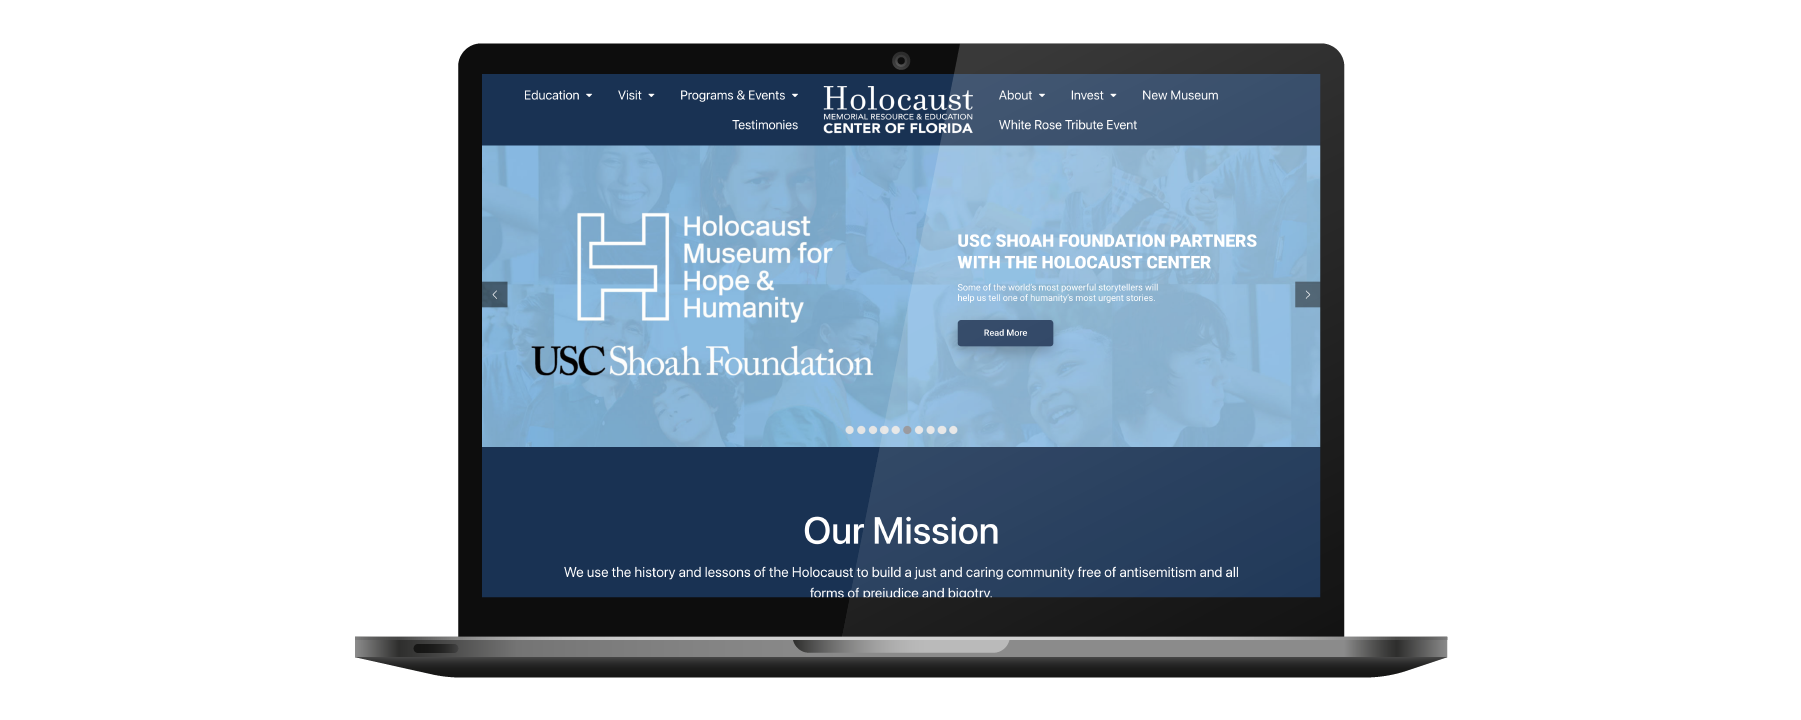 Holocaust Museum and Education Center Website on Laptop